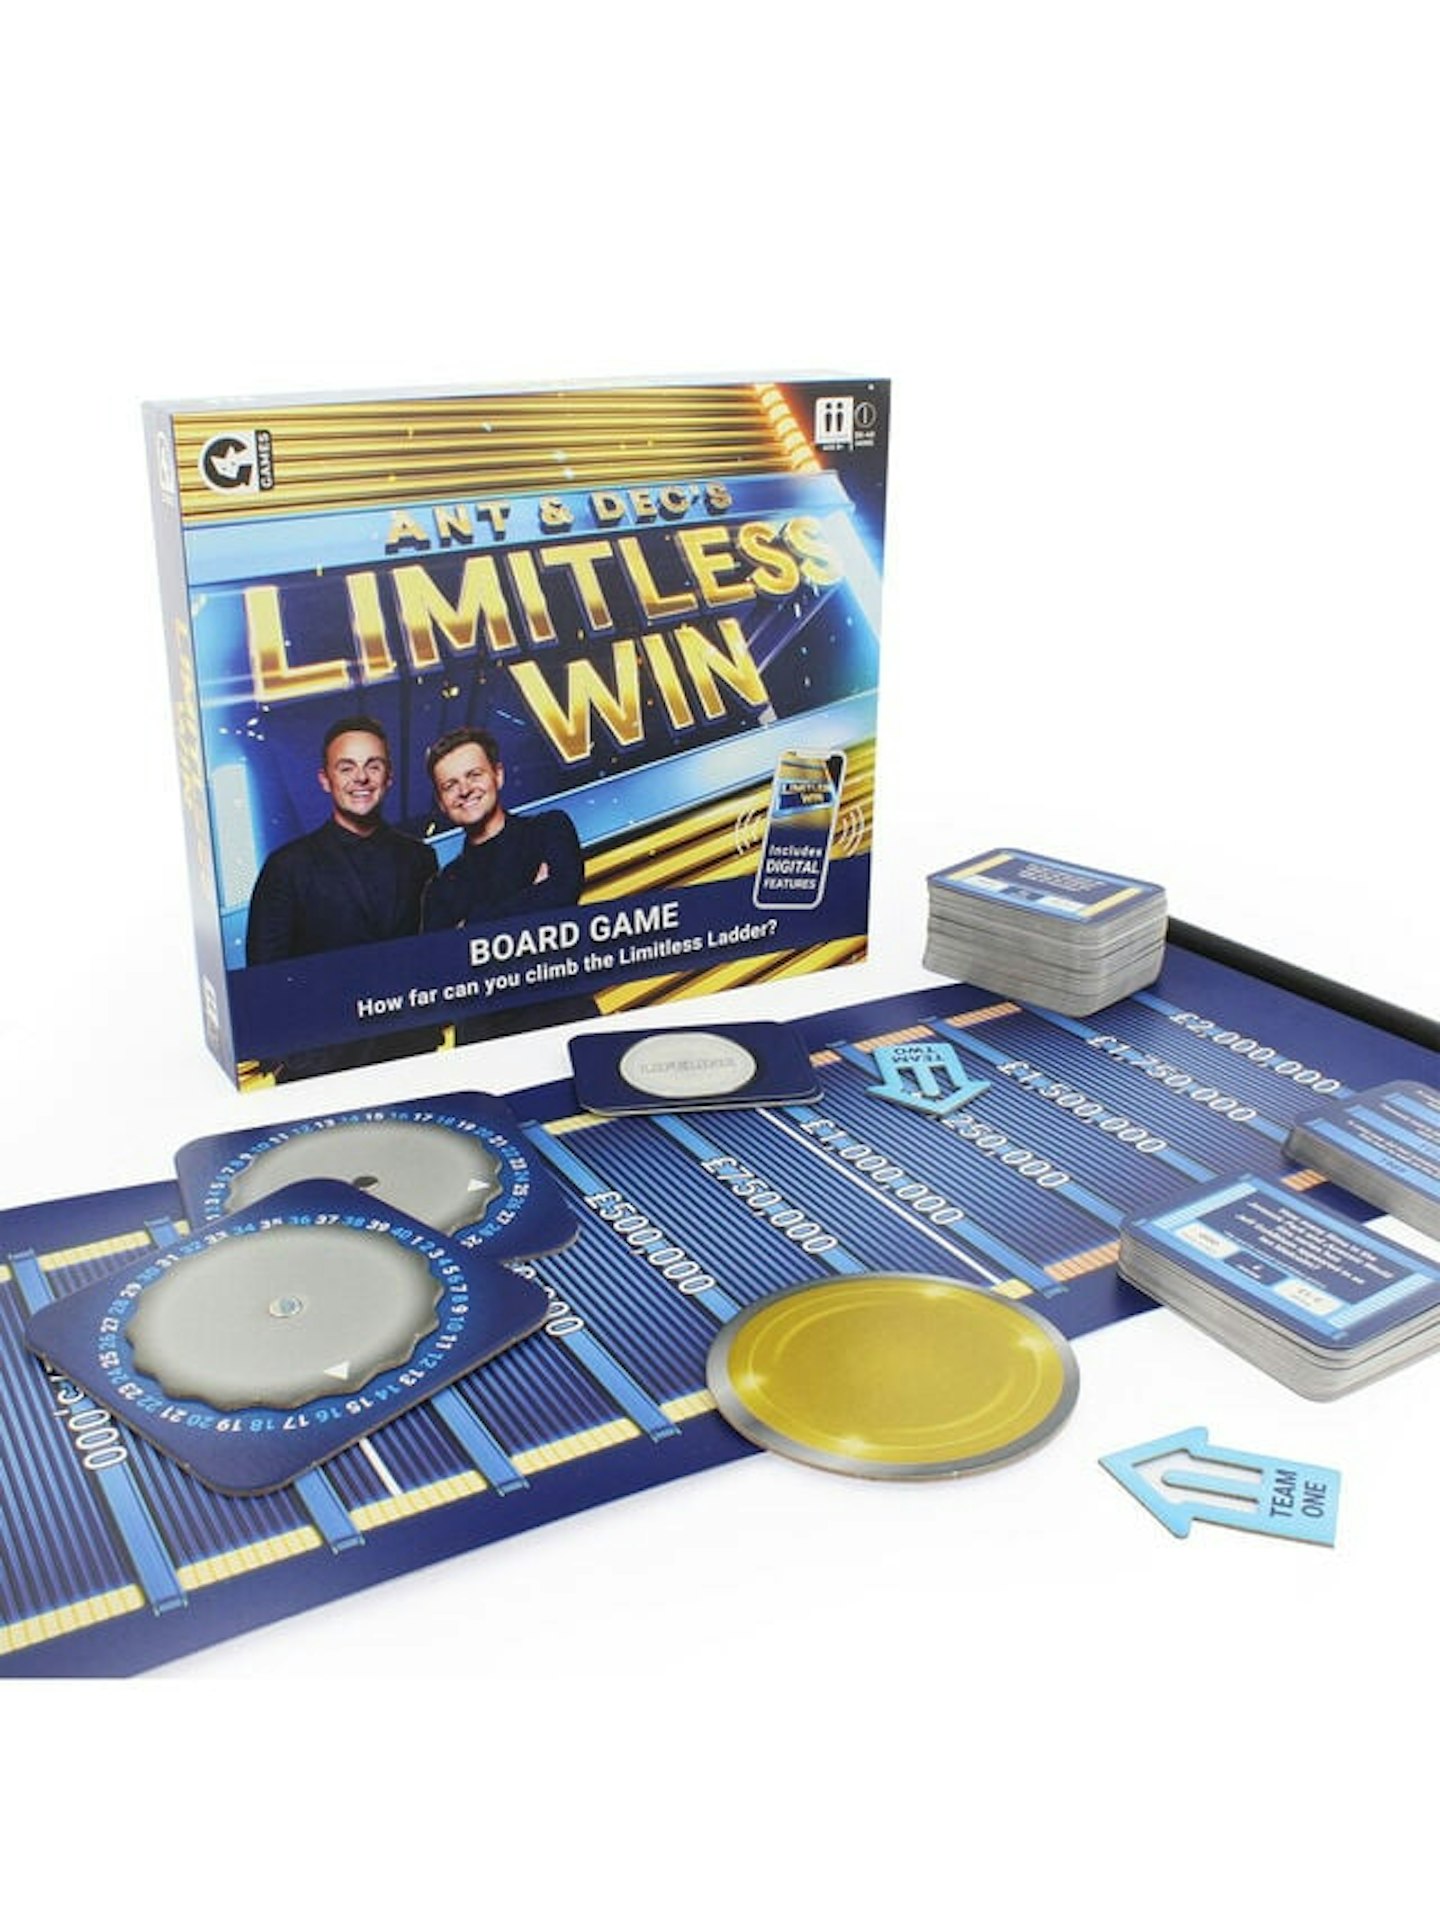 Ant and Dec’s Limitless Win board game box and contents